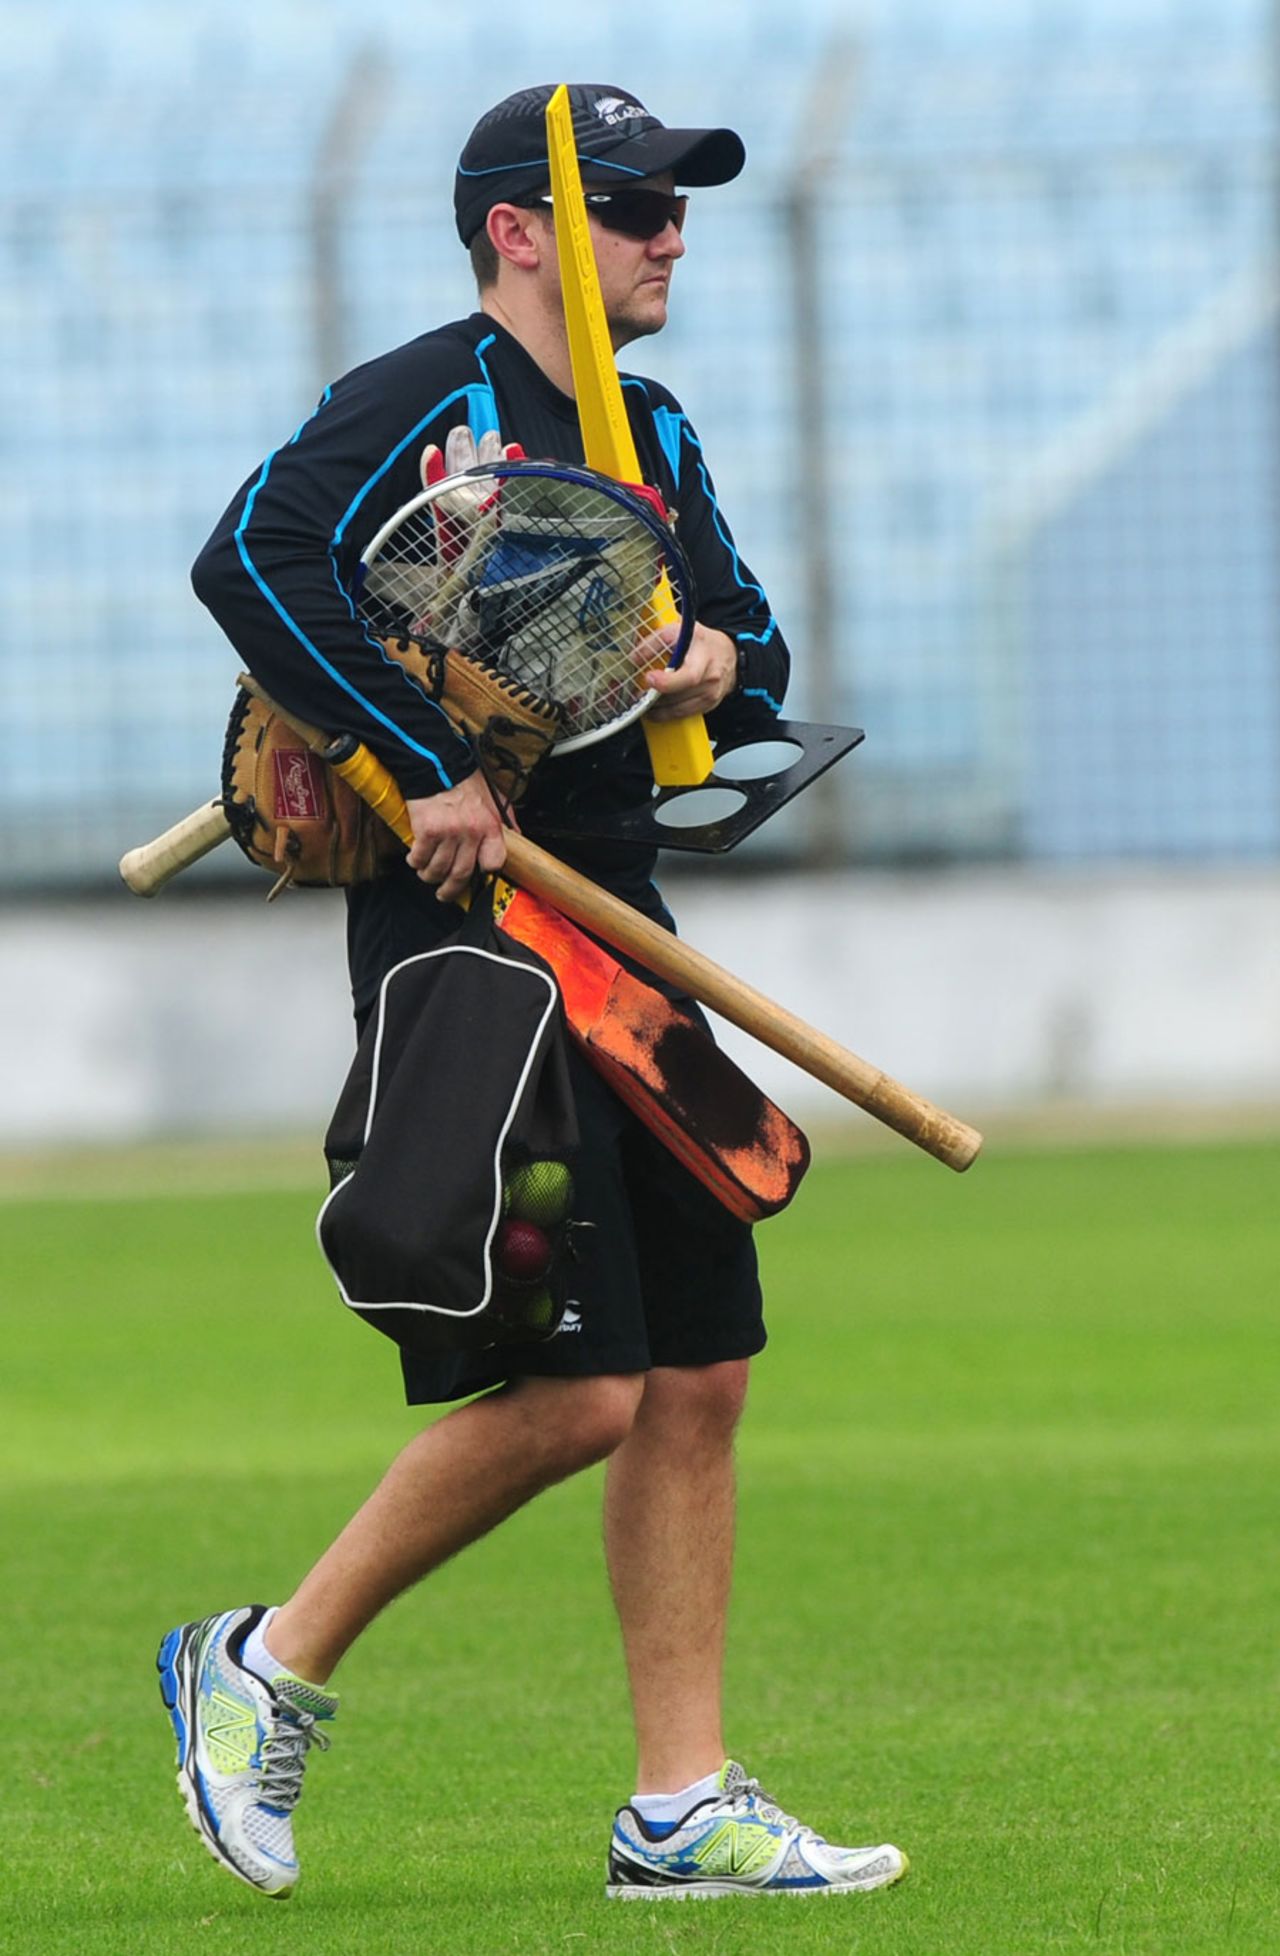 Mike Hesson carries training equipment during a practice session, Chittagong, October 7, 2013